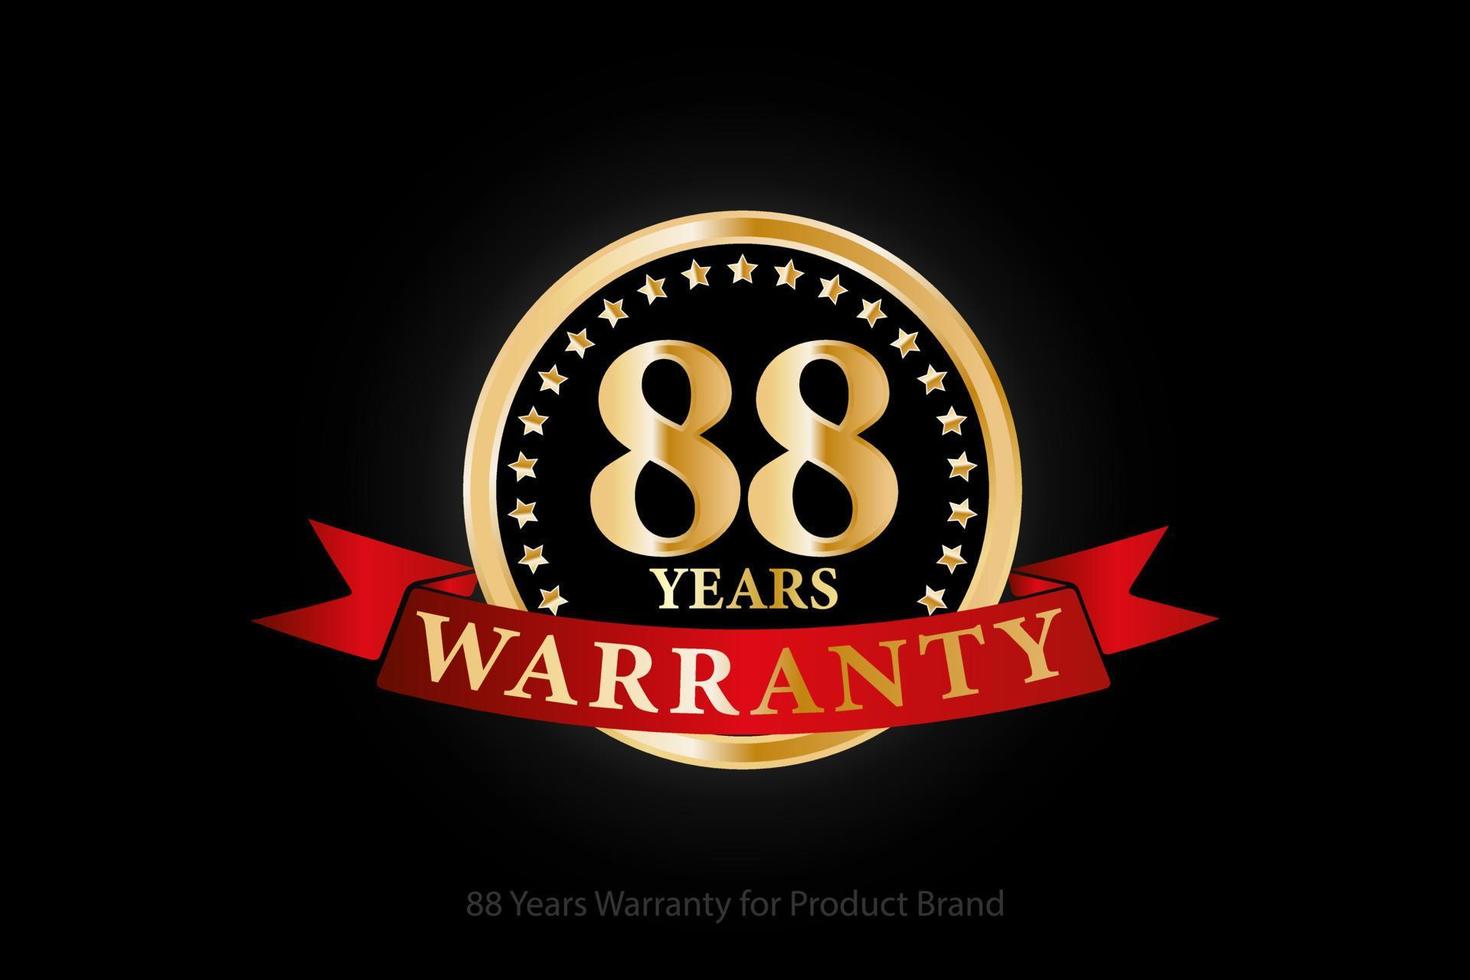 88 years warranty golden logo with ring and red ribbon isolated on black background, vector design for product warranty, guarantee, service, corporate, and your business.